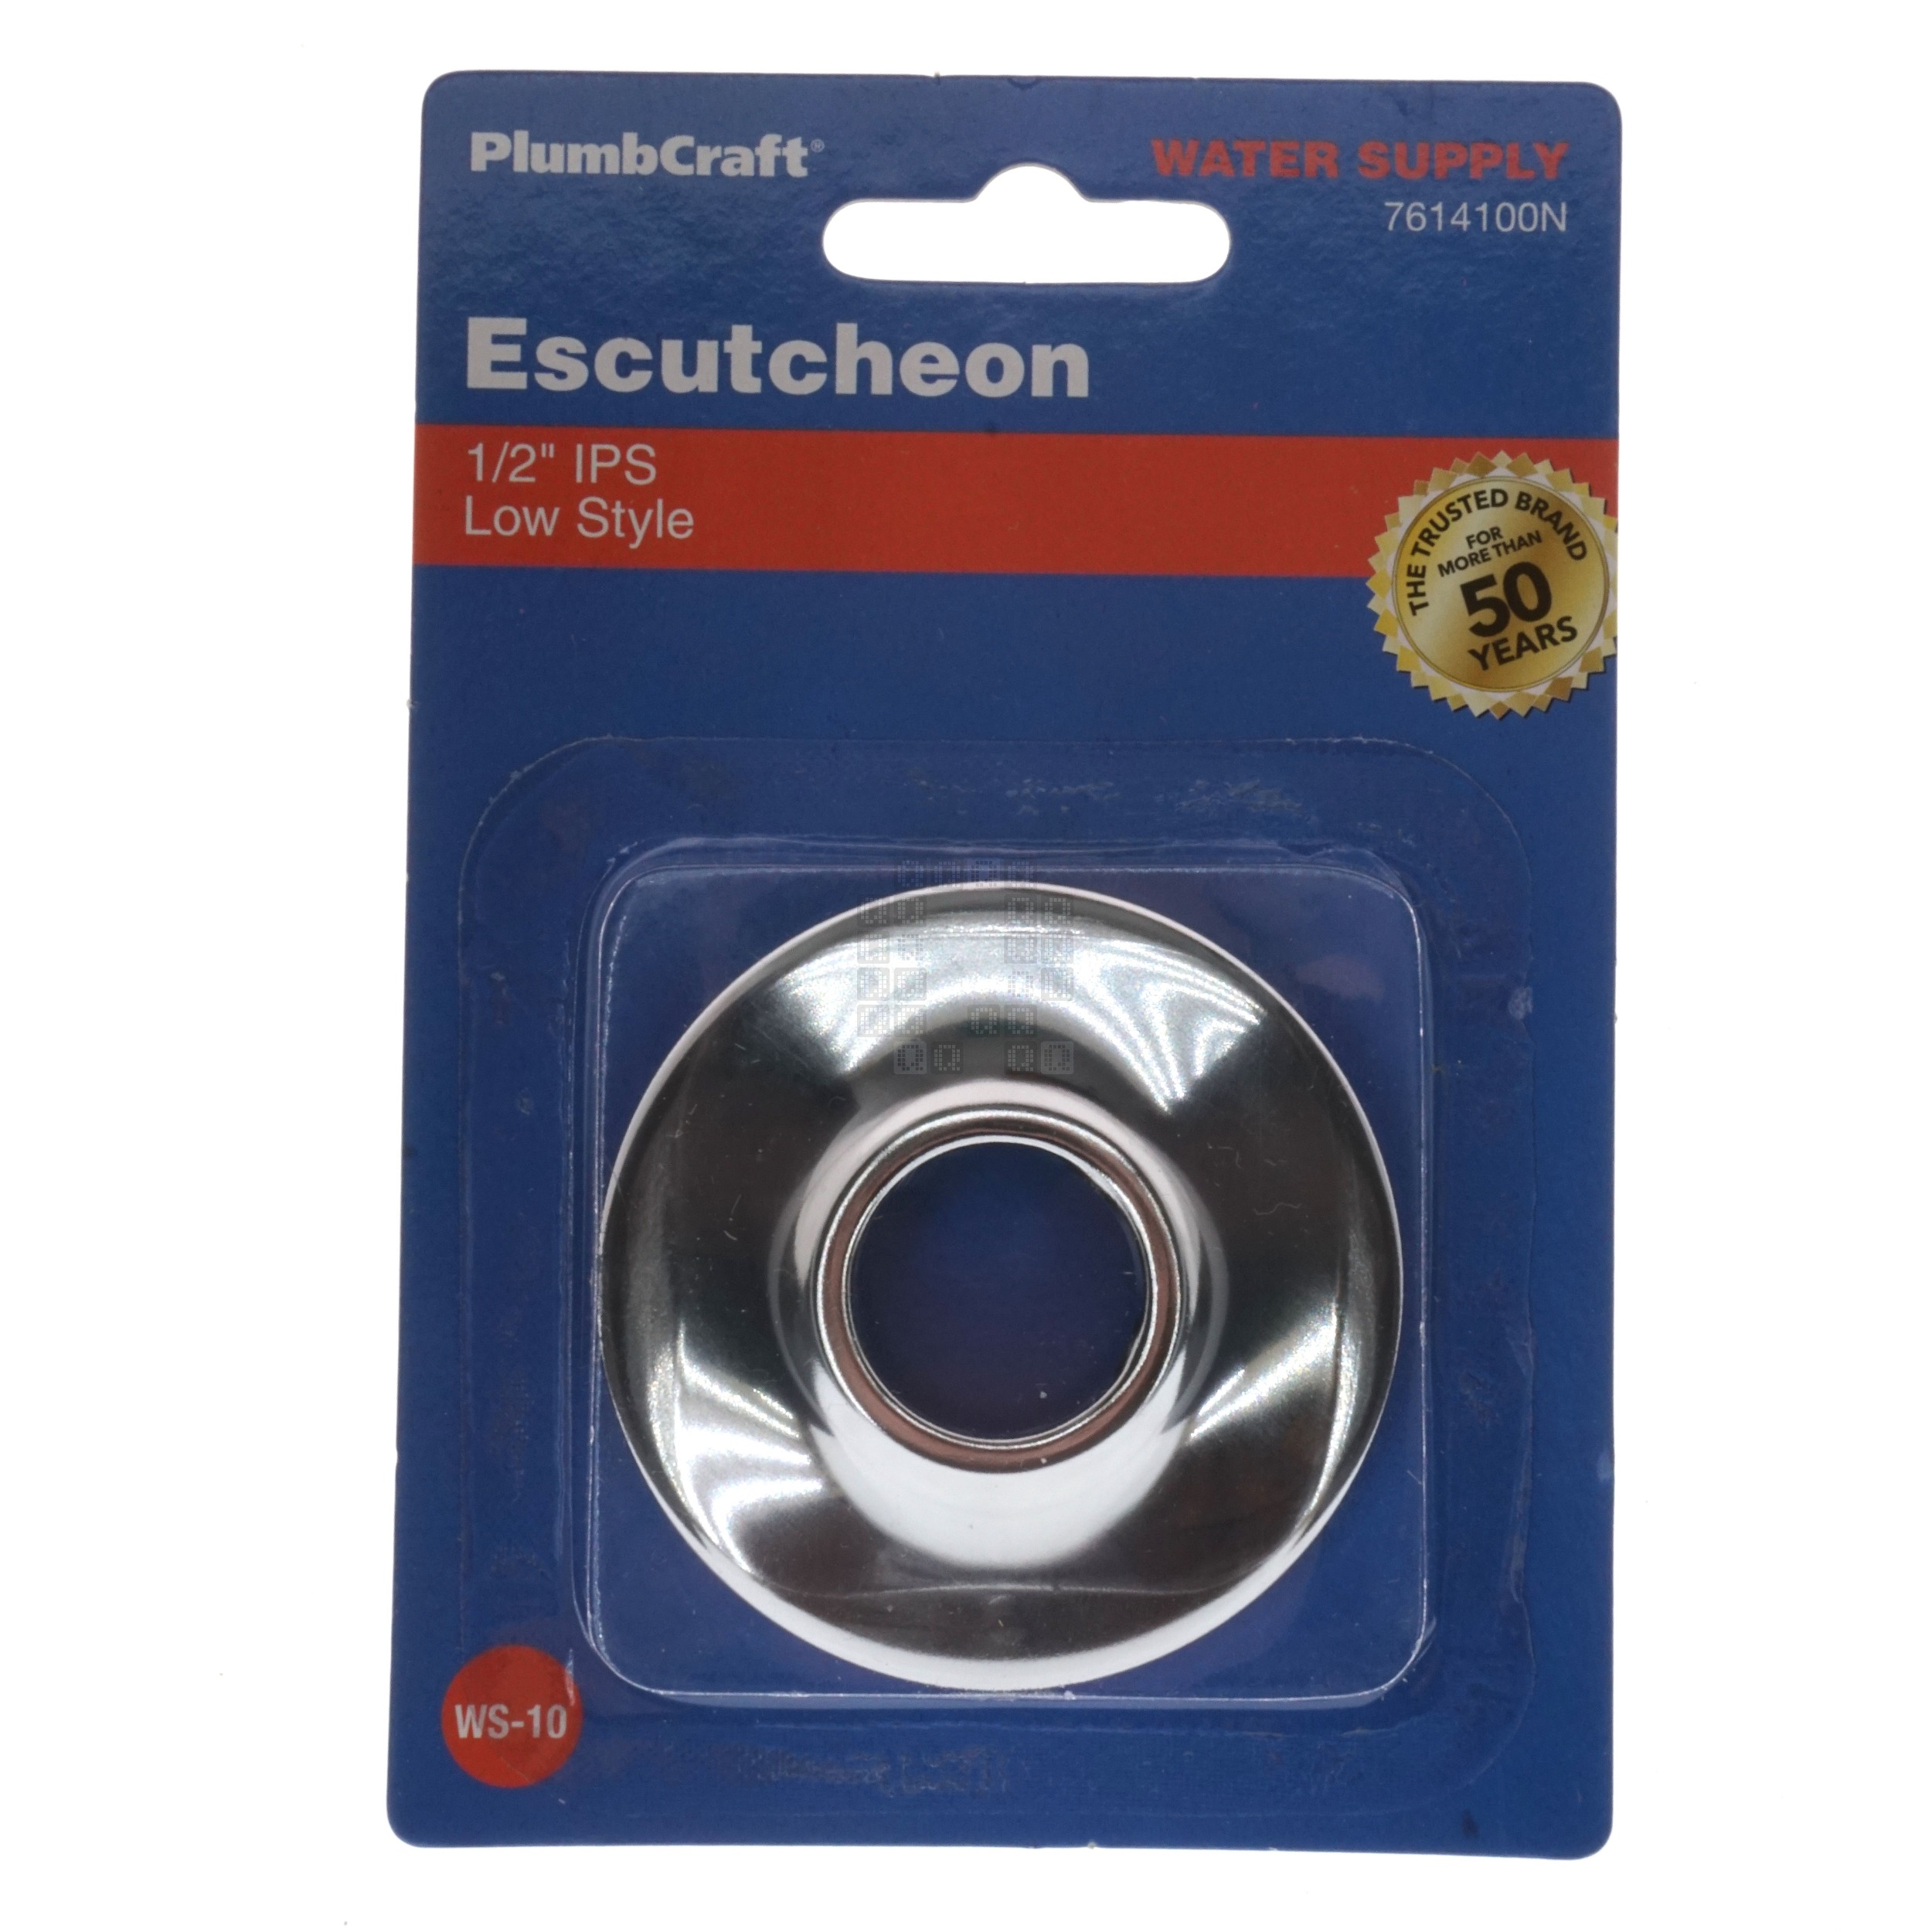 PlumbCraft 7614100N Chrome Plated Stainless Steel Escutcheon, 1/2" IPS, Low Style